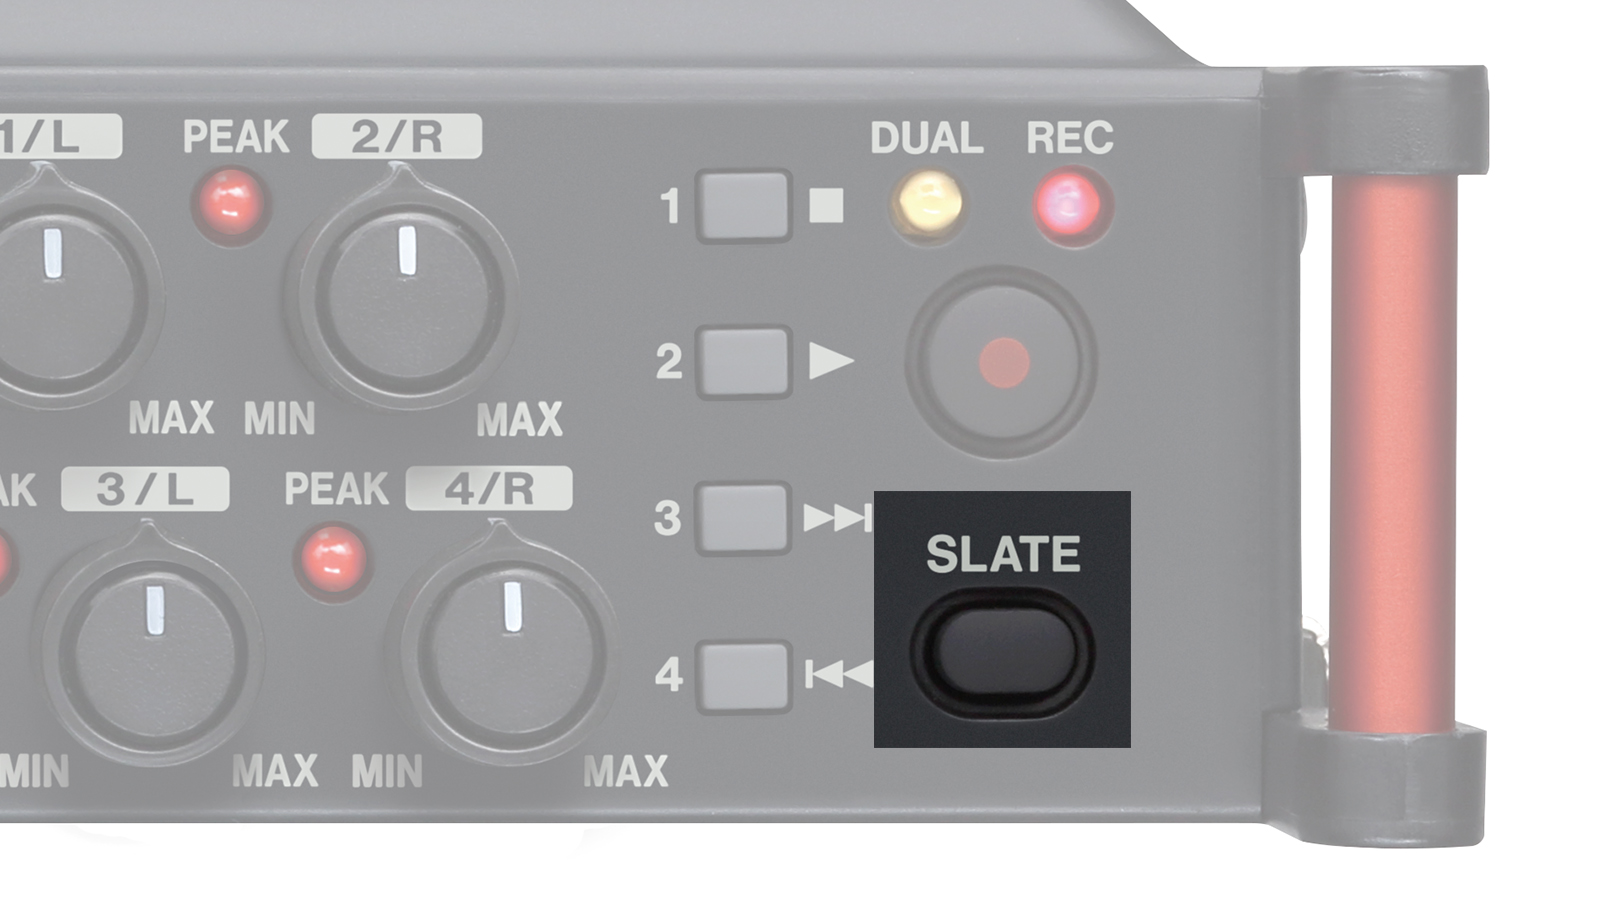 Slate tone generator makes alignment with video files easy